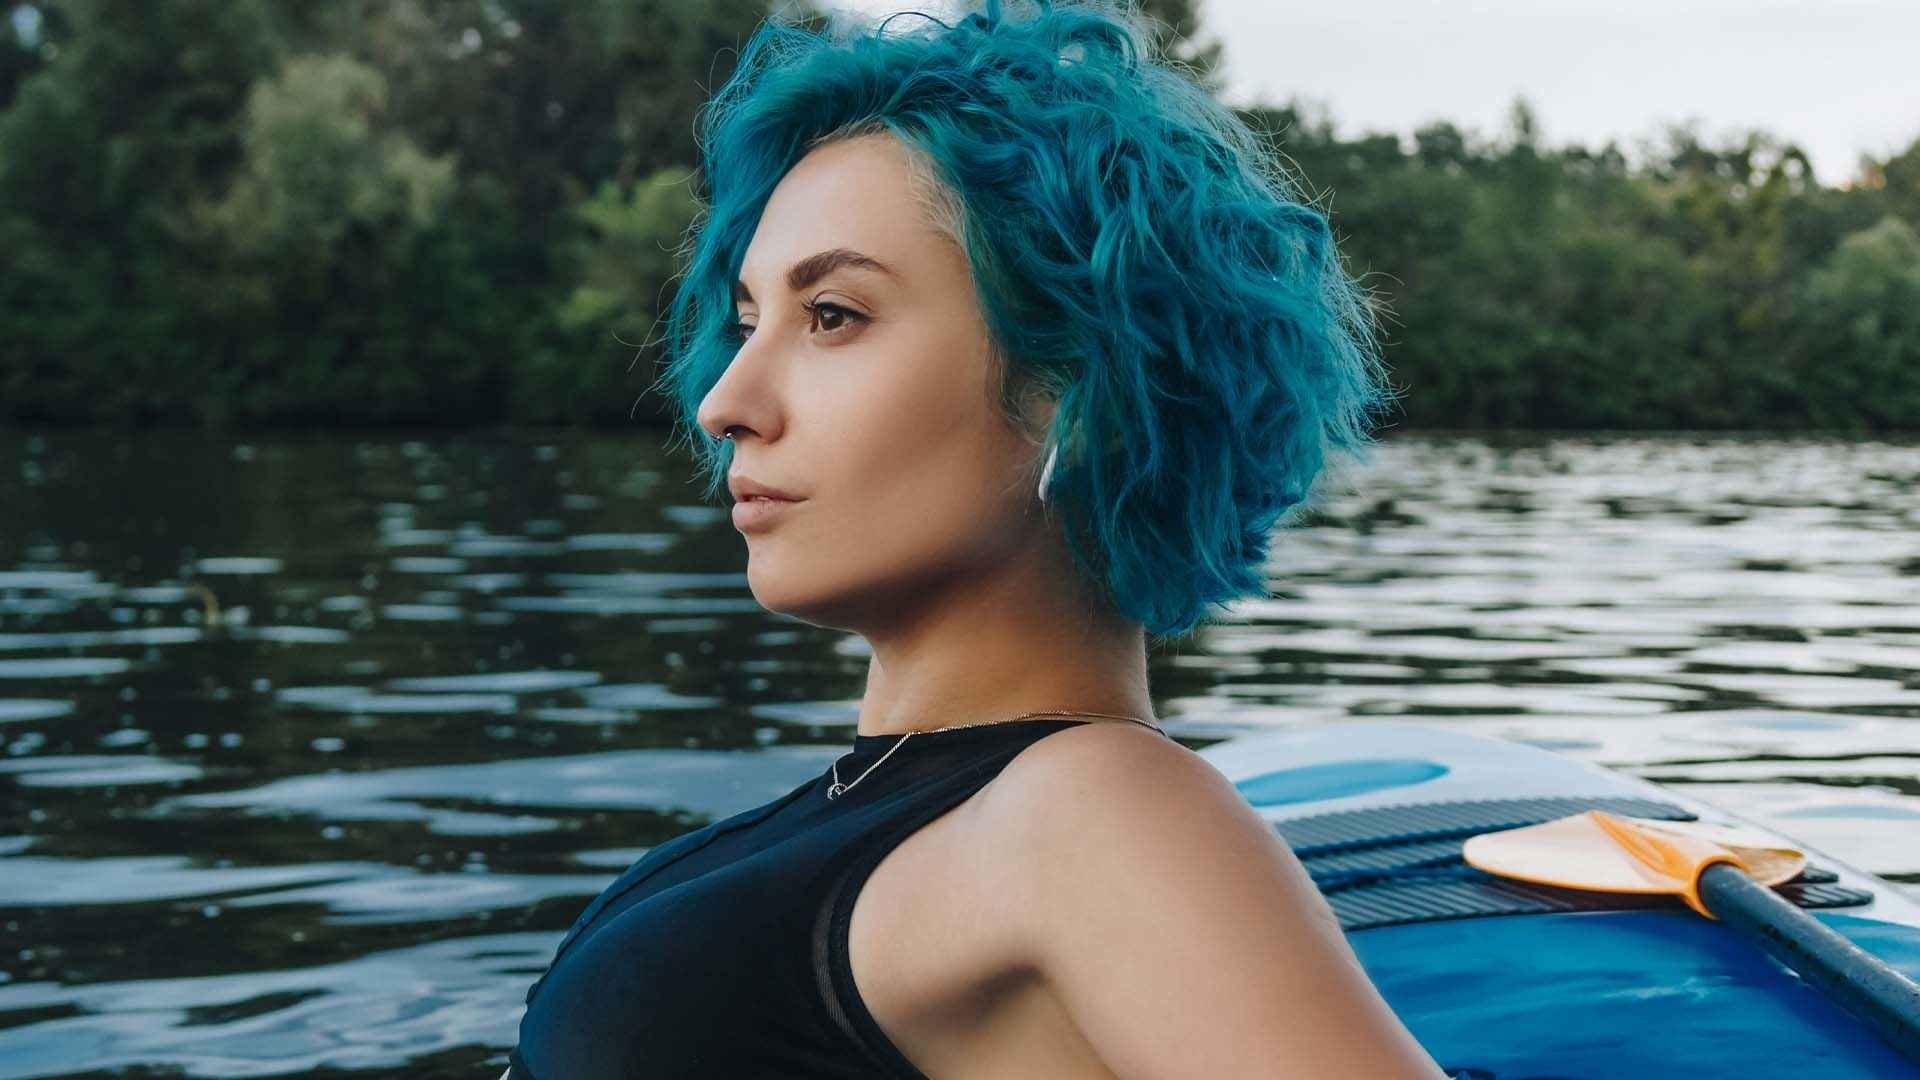 How to Get a Teal or Turquoise Hair Color - L'Oréal Paris